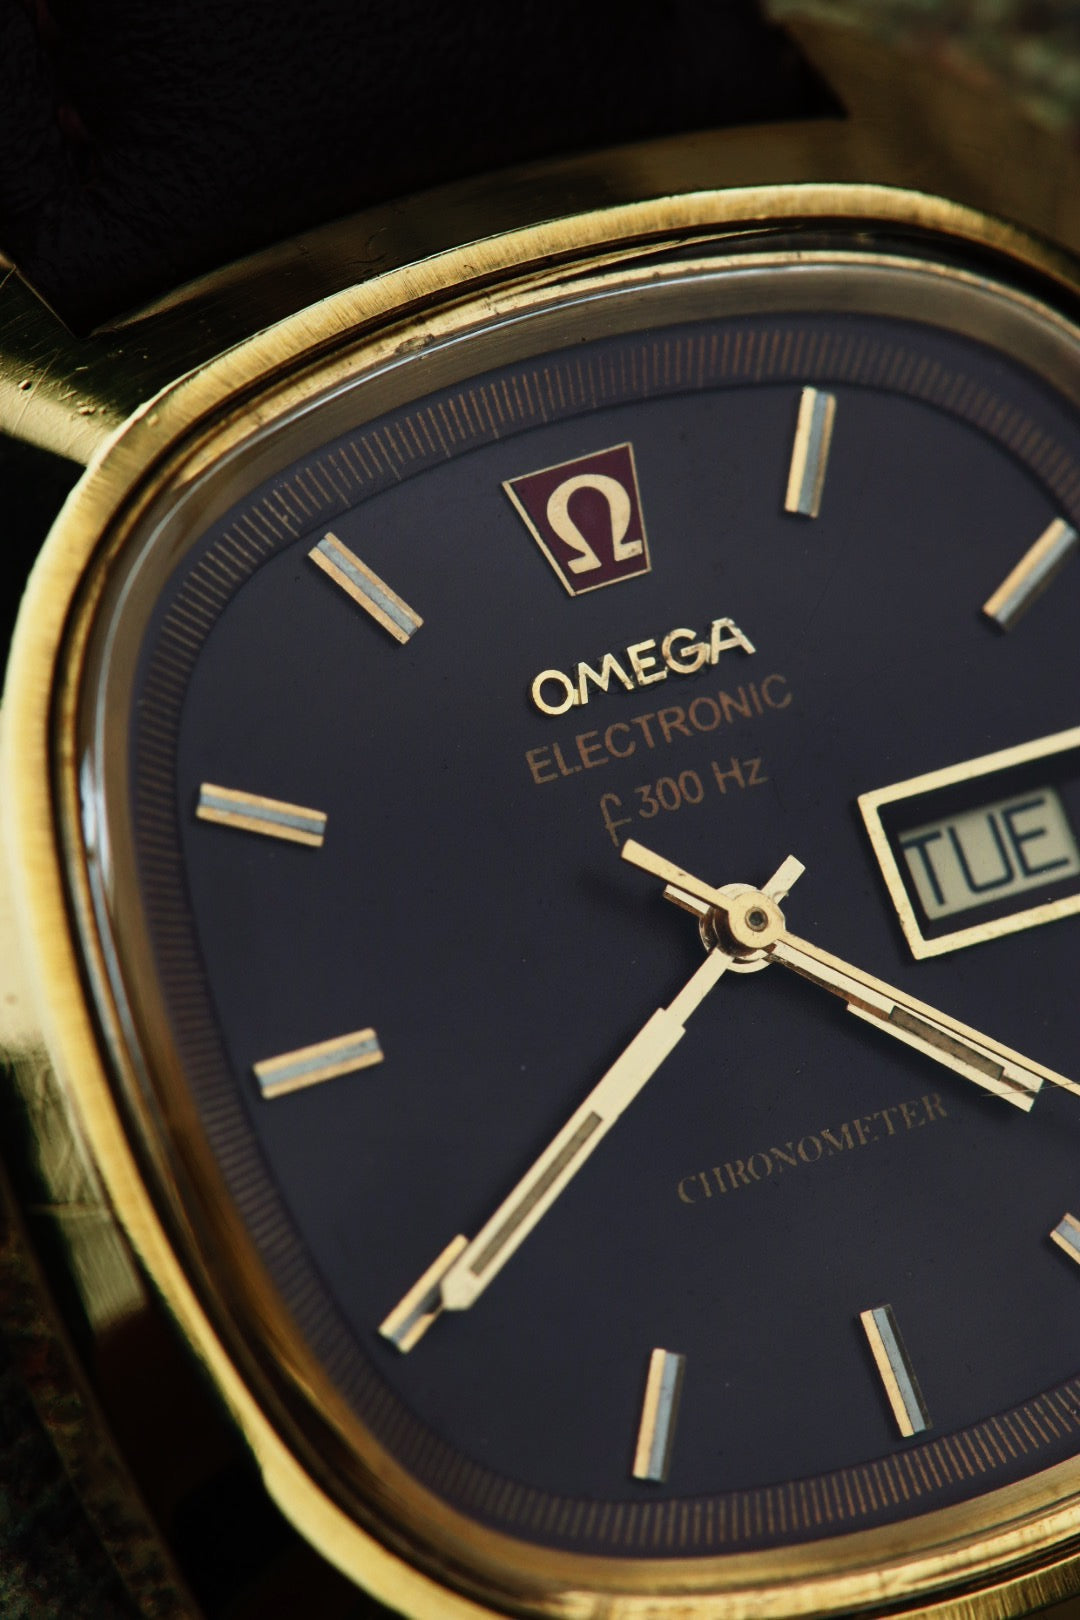 Omega Constellation Electronic F300 HZ